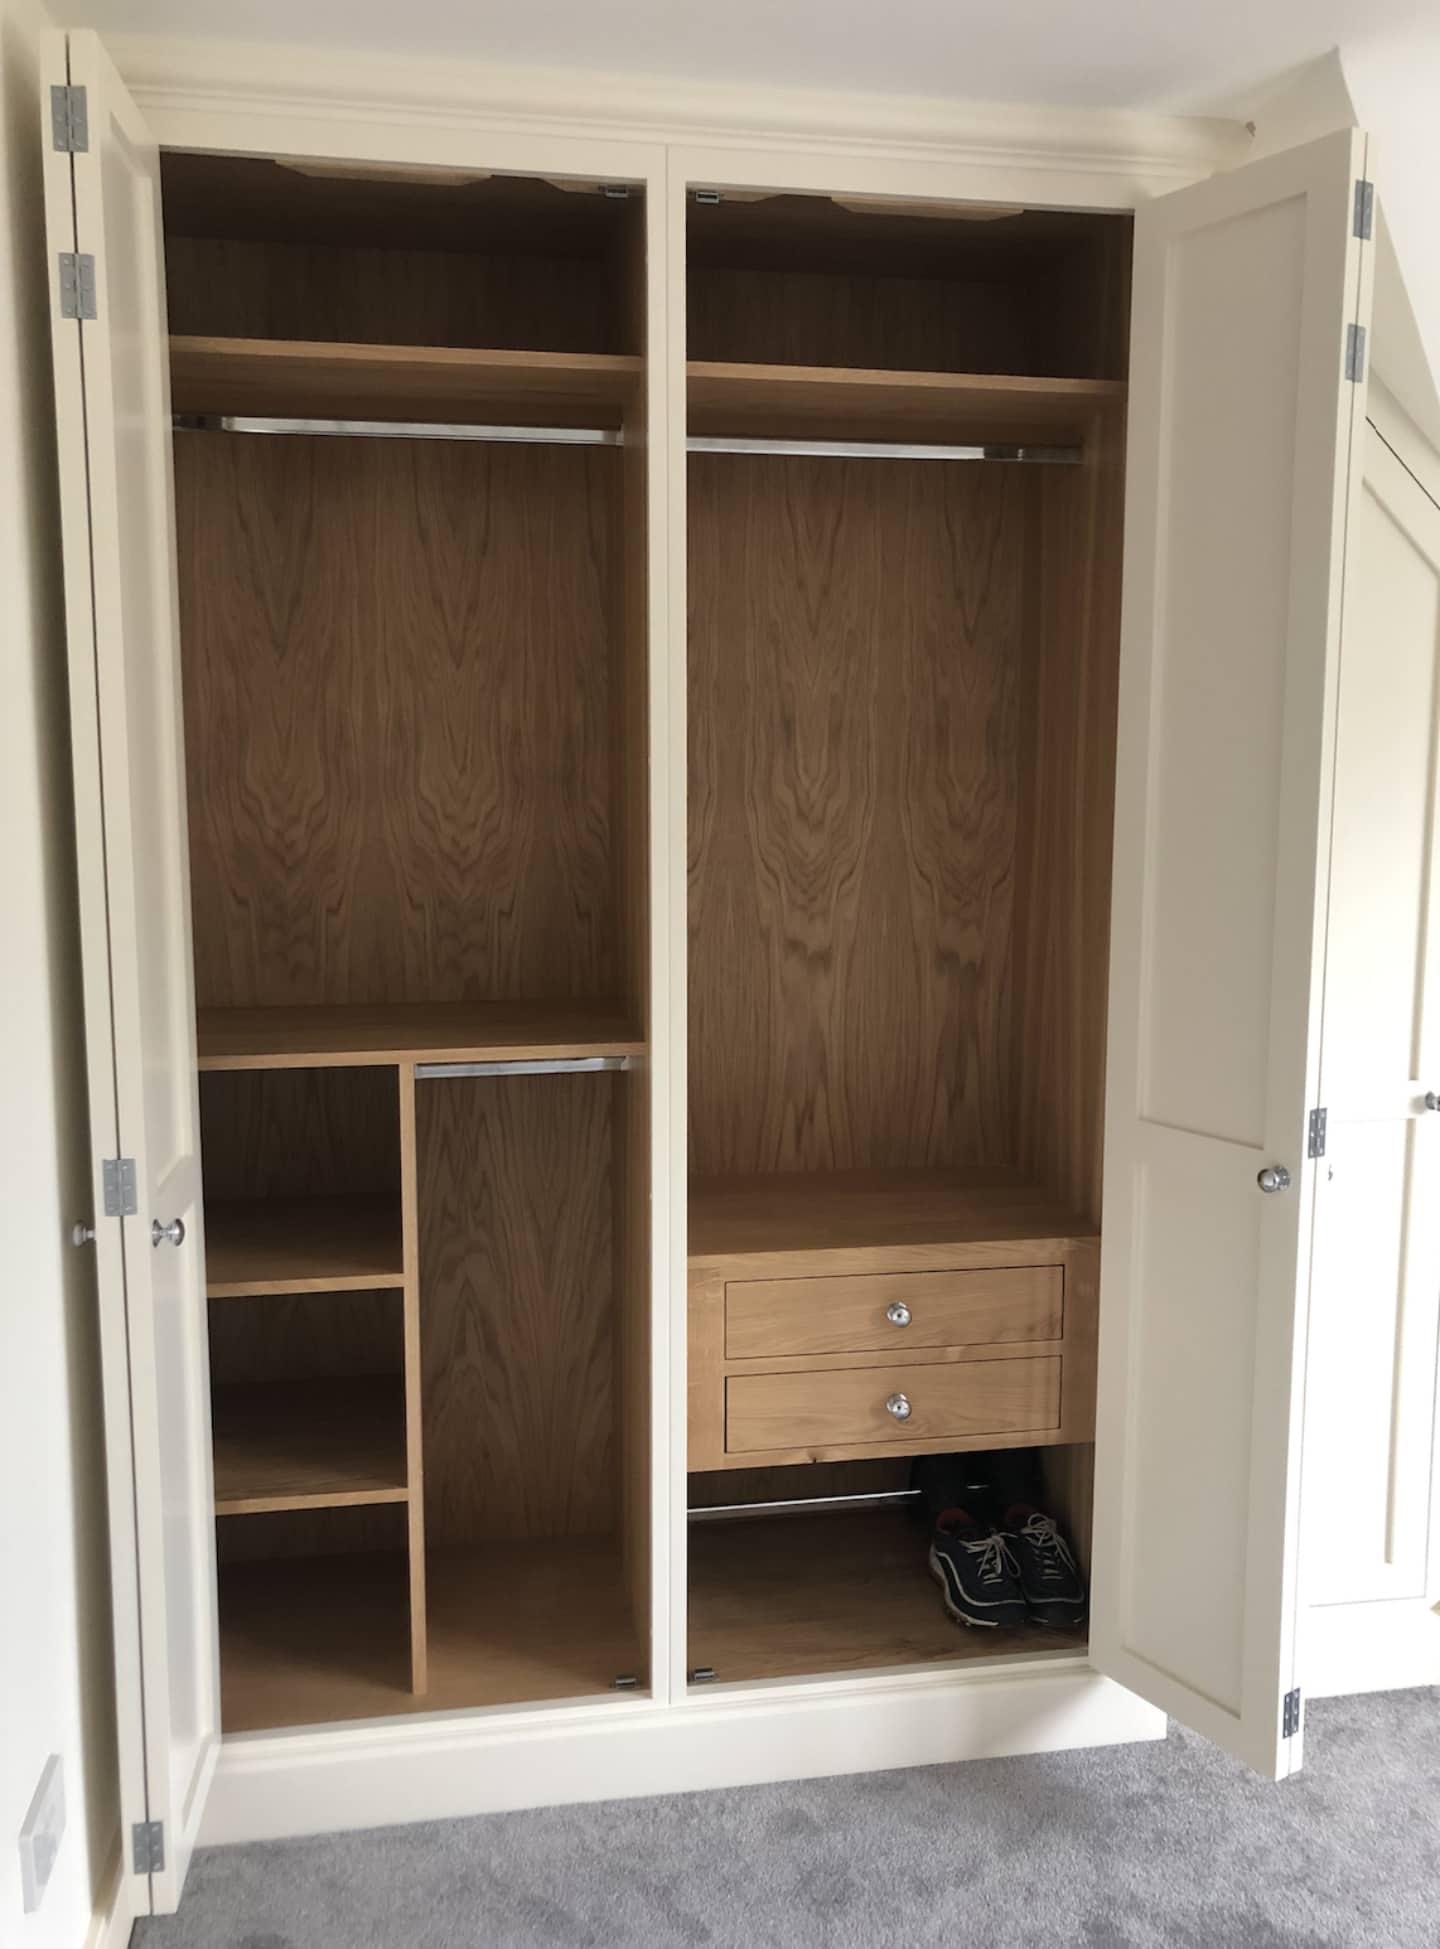 A bespoke fitted wardrobe with the doors open showing the custom interior.